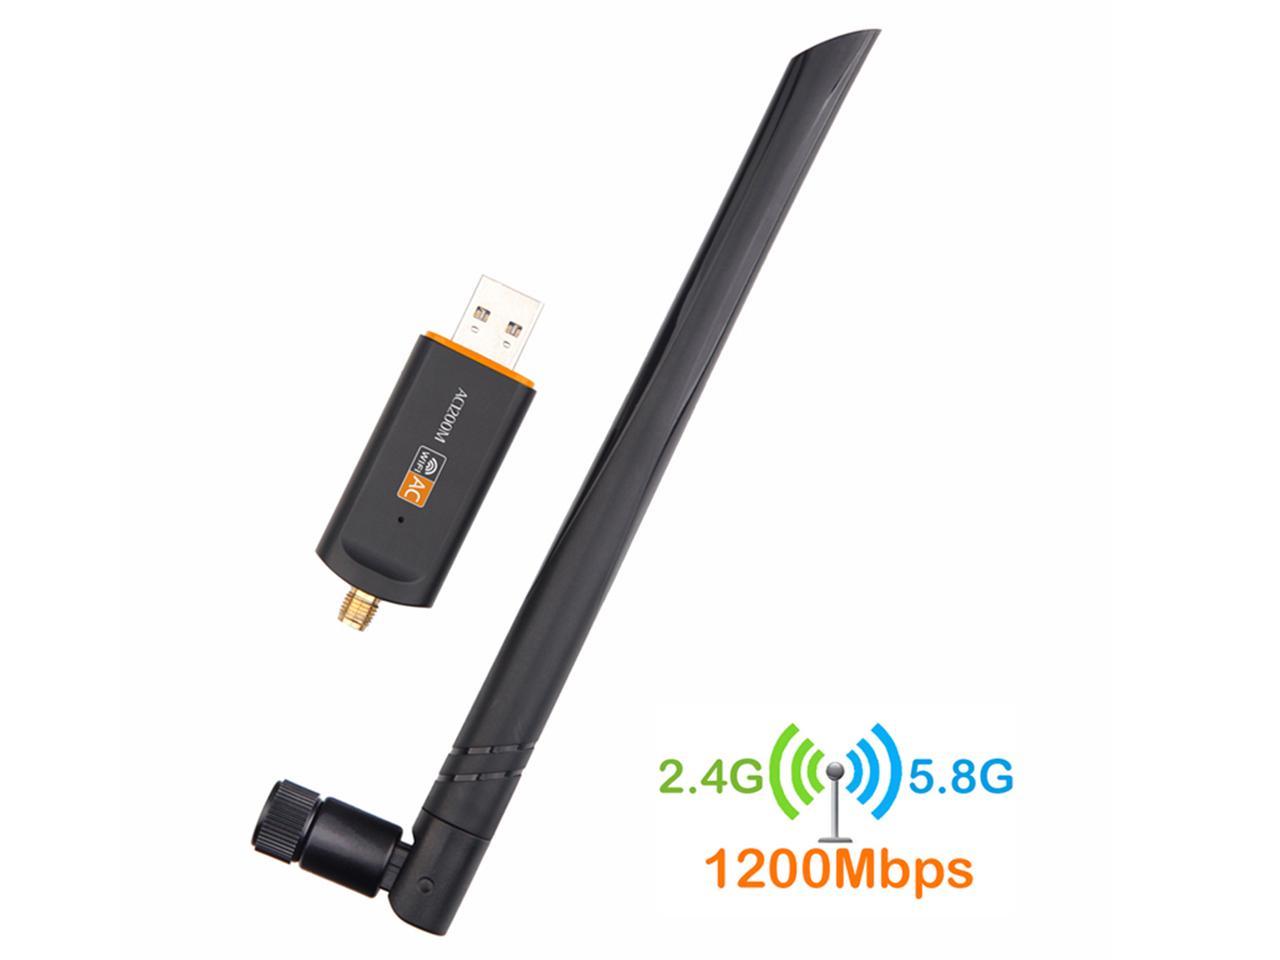 KuWFi WiFi Adapter 1200Mbps USB3.0 Cable Dual 5dBi Antenna Ethernet Dongle Support Windows XP/Vista 7/8/10 Mac 